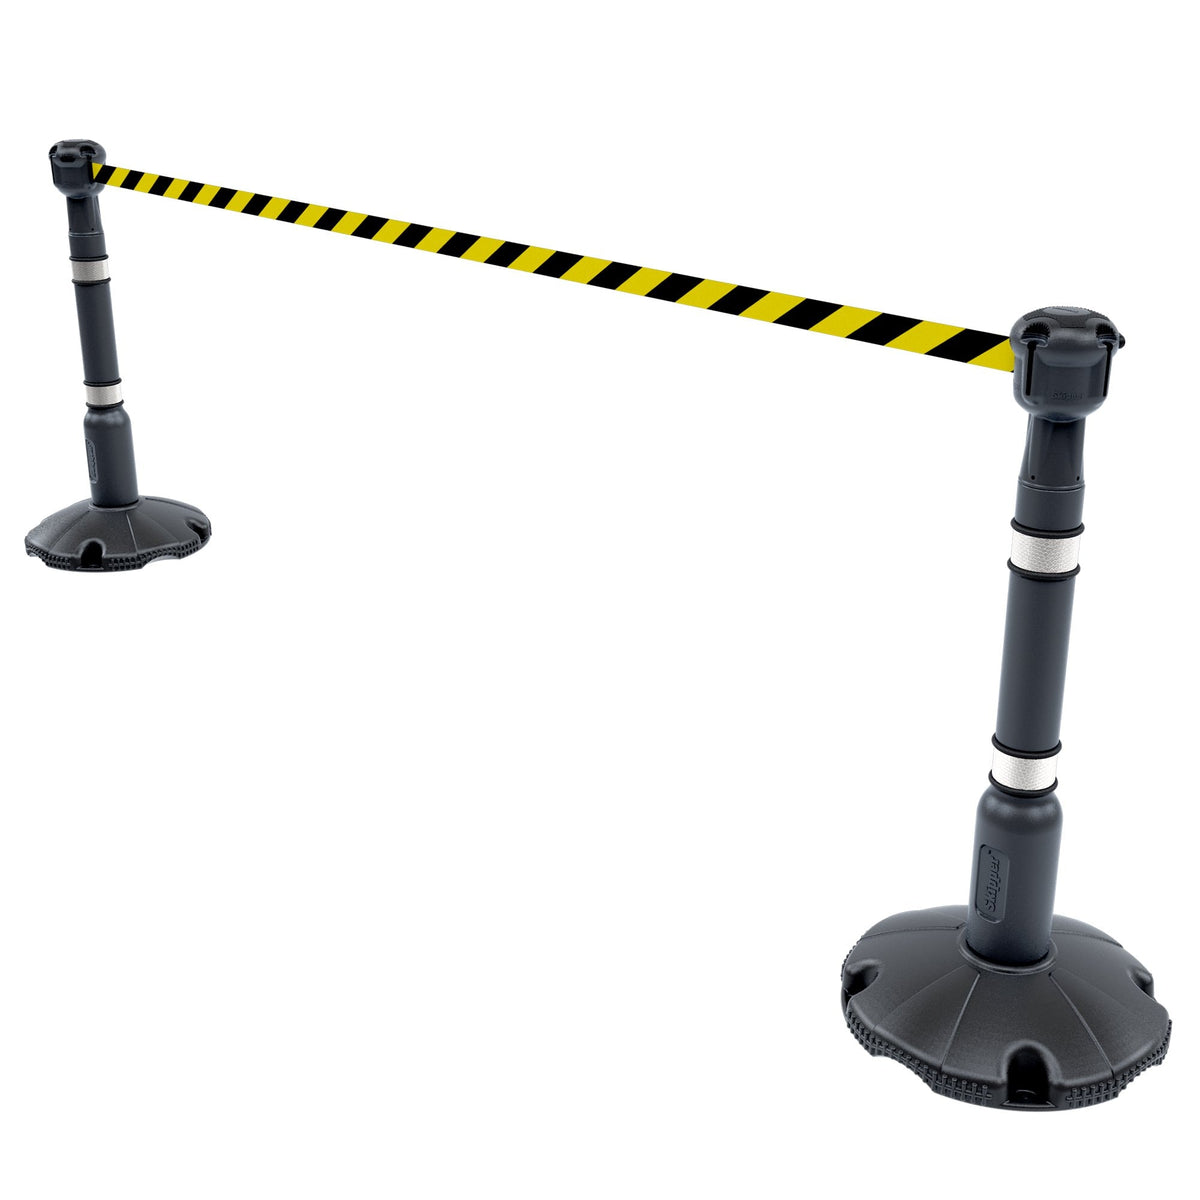 Skipper 9m Retractable Safety Barrier Complete Kit - Kit10 Retractable > Crowd Barrier > Tensa > Skipper One Stop For Safety Silver Black & Yellow Chevron 